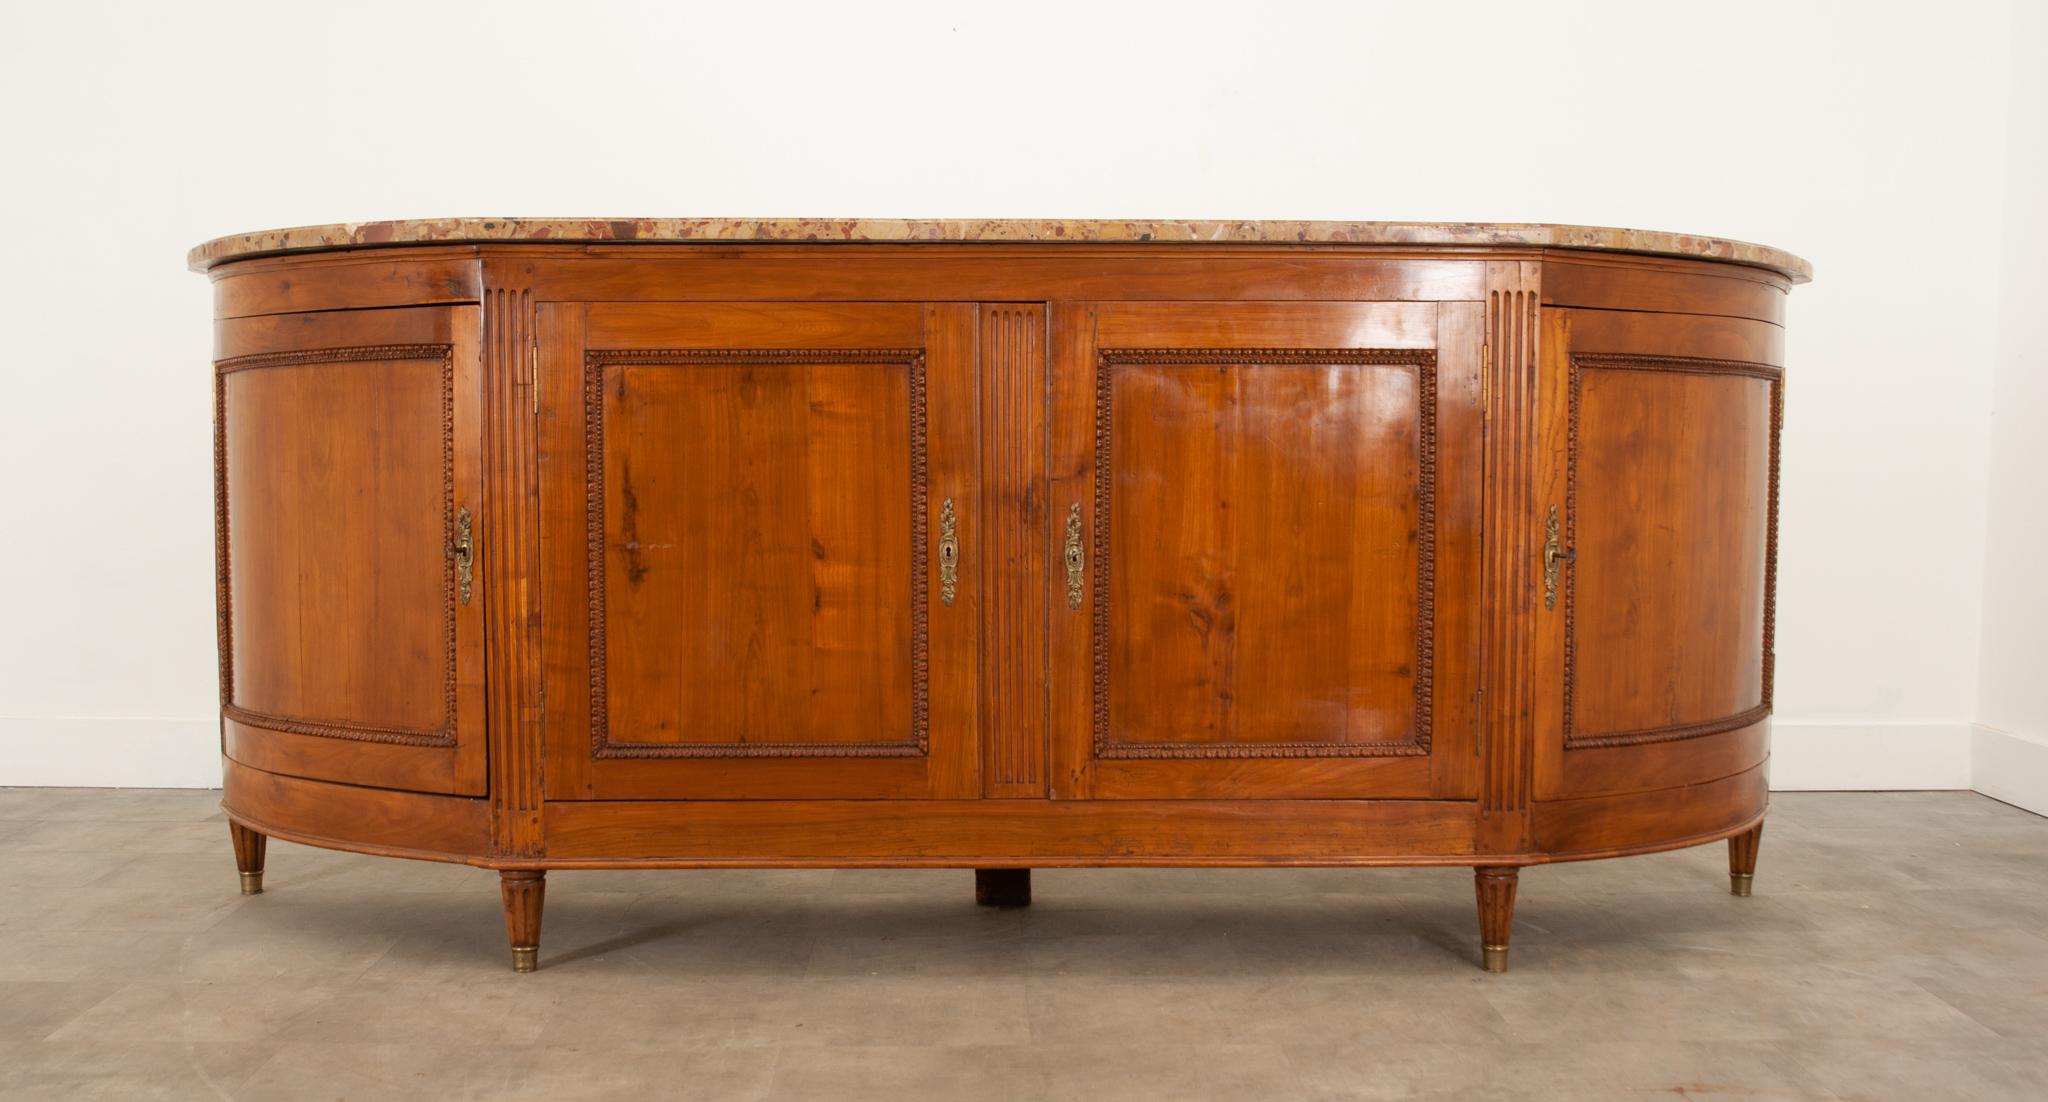 This Directoire enfilade is a great way to add more storage to any space. Topped with its original, shaped stone top that has been professionally repaired in two places- though it’s difficult to tell due to the movement of the stone. All four lower